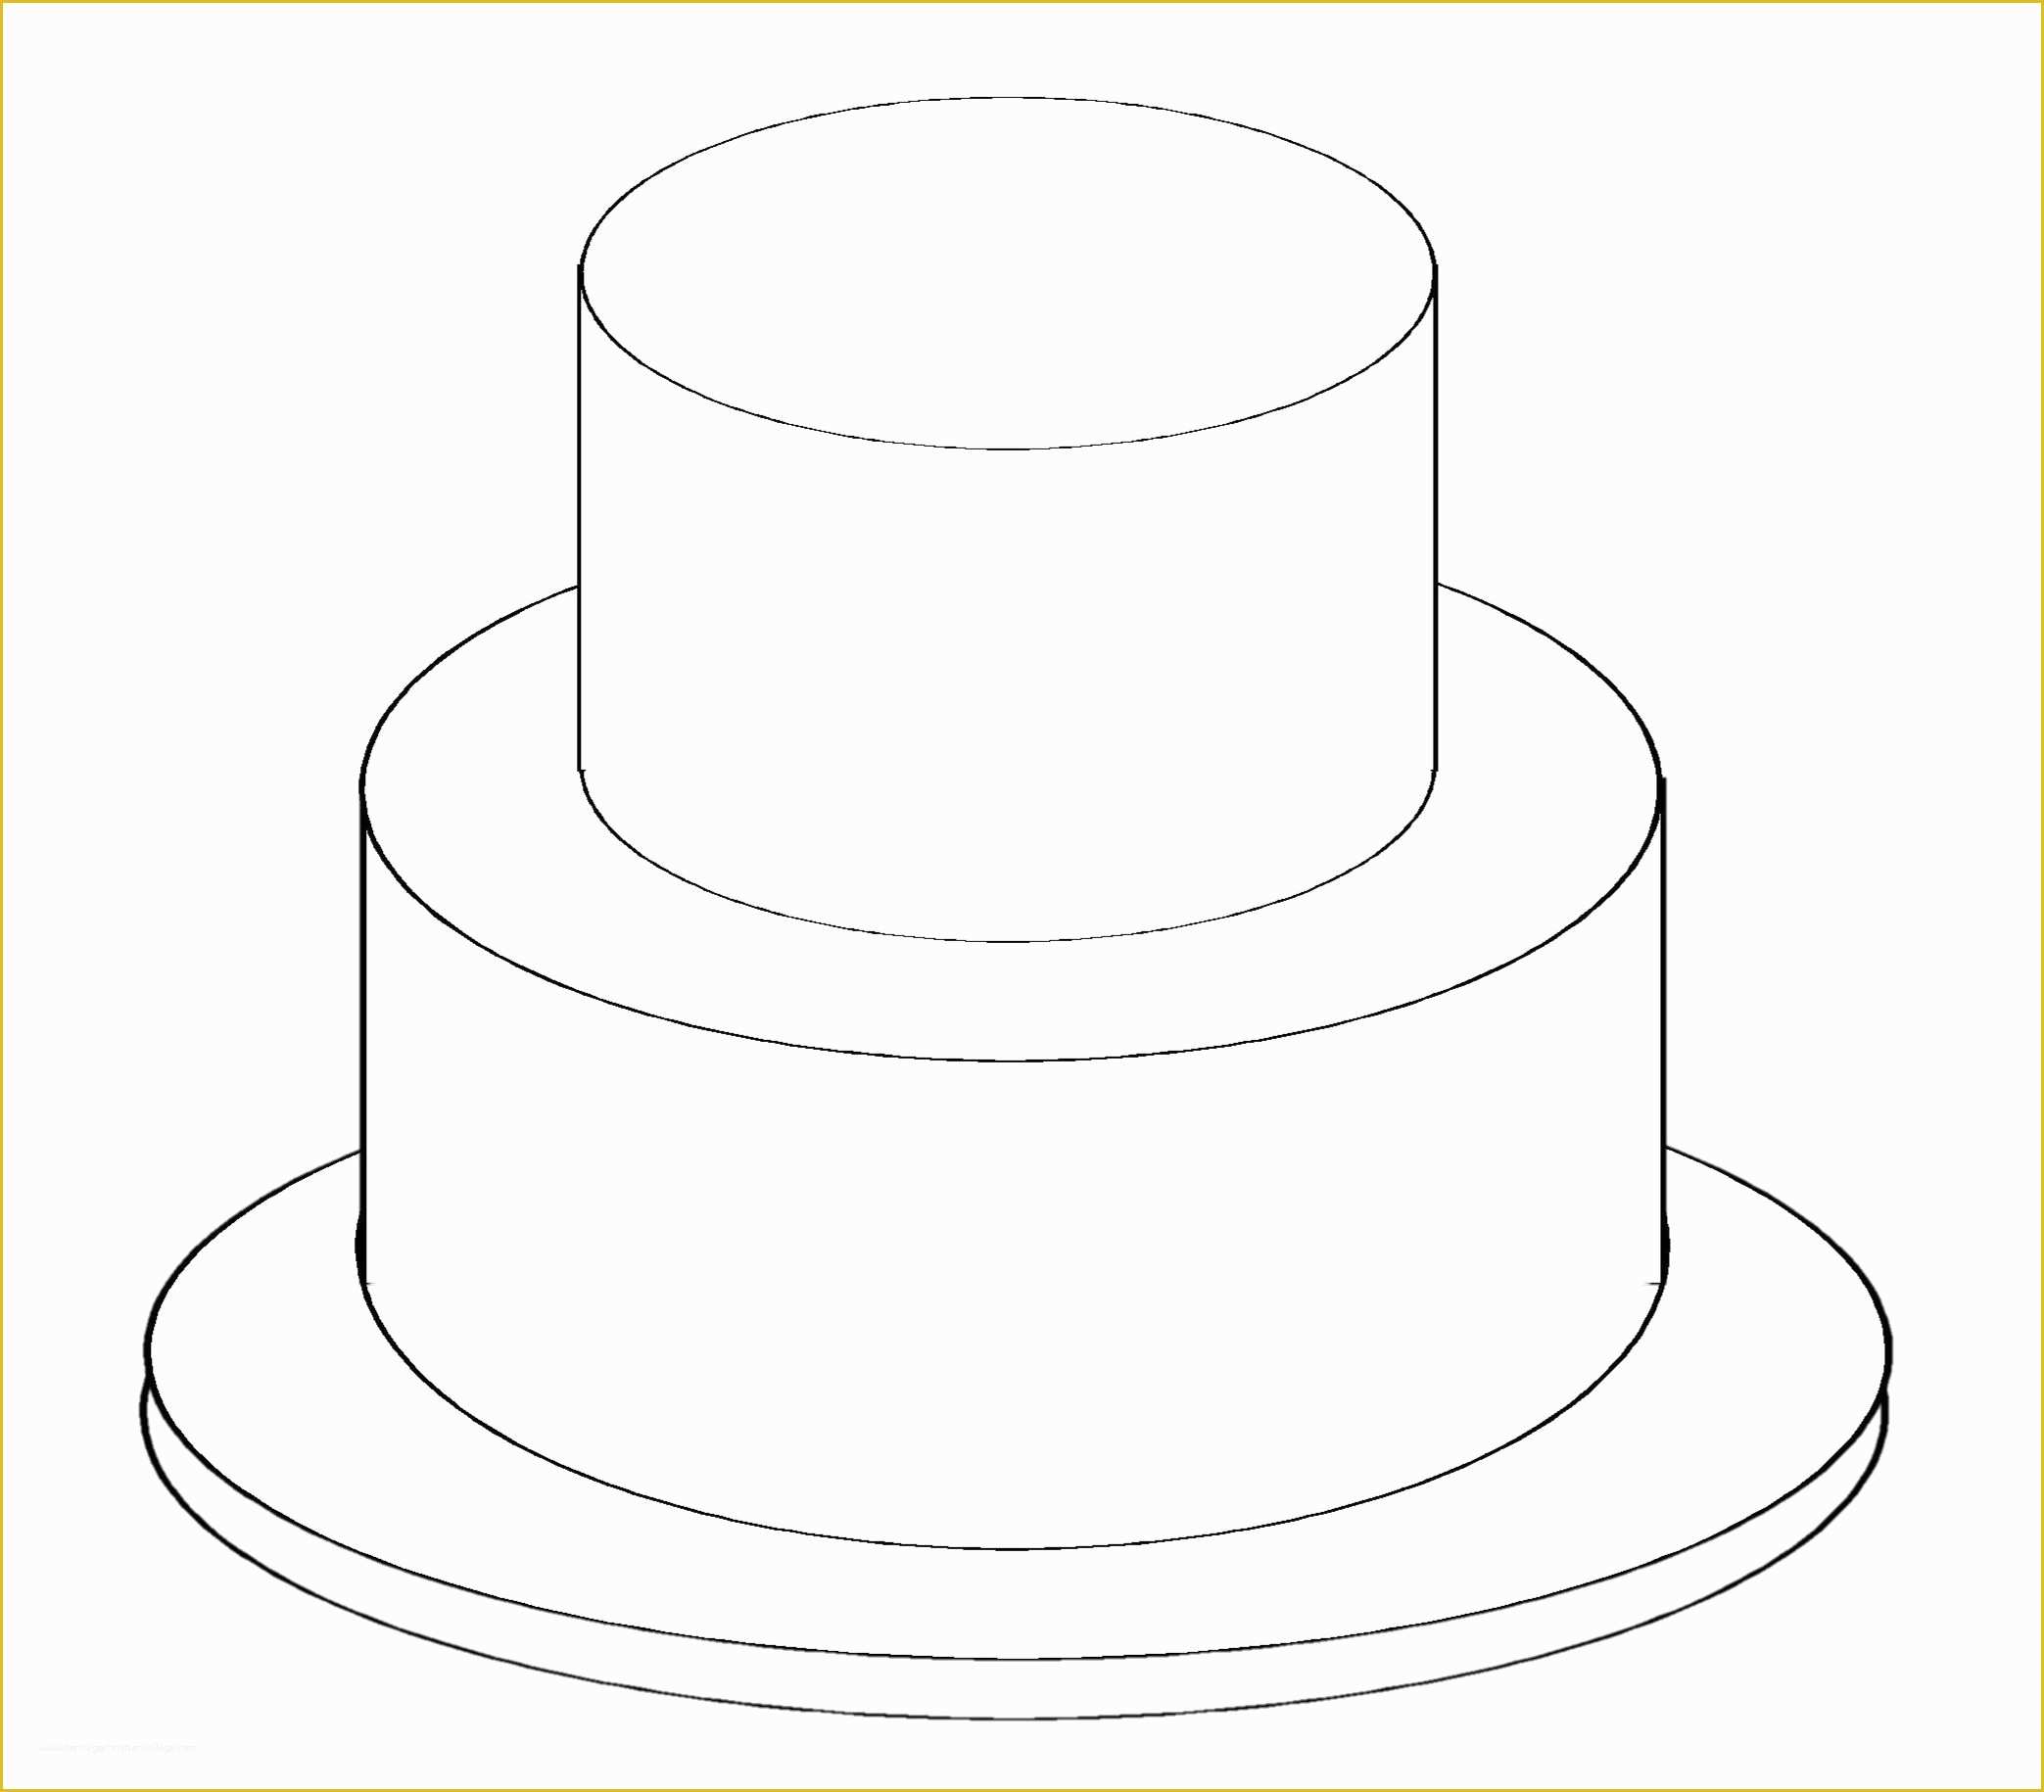 Free Printable Cake Templates Of Wedding Cake Clipart Blank Pencil and